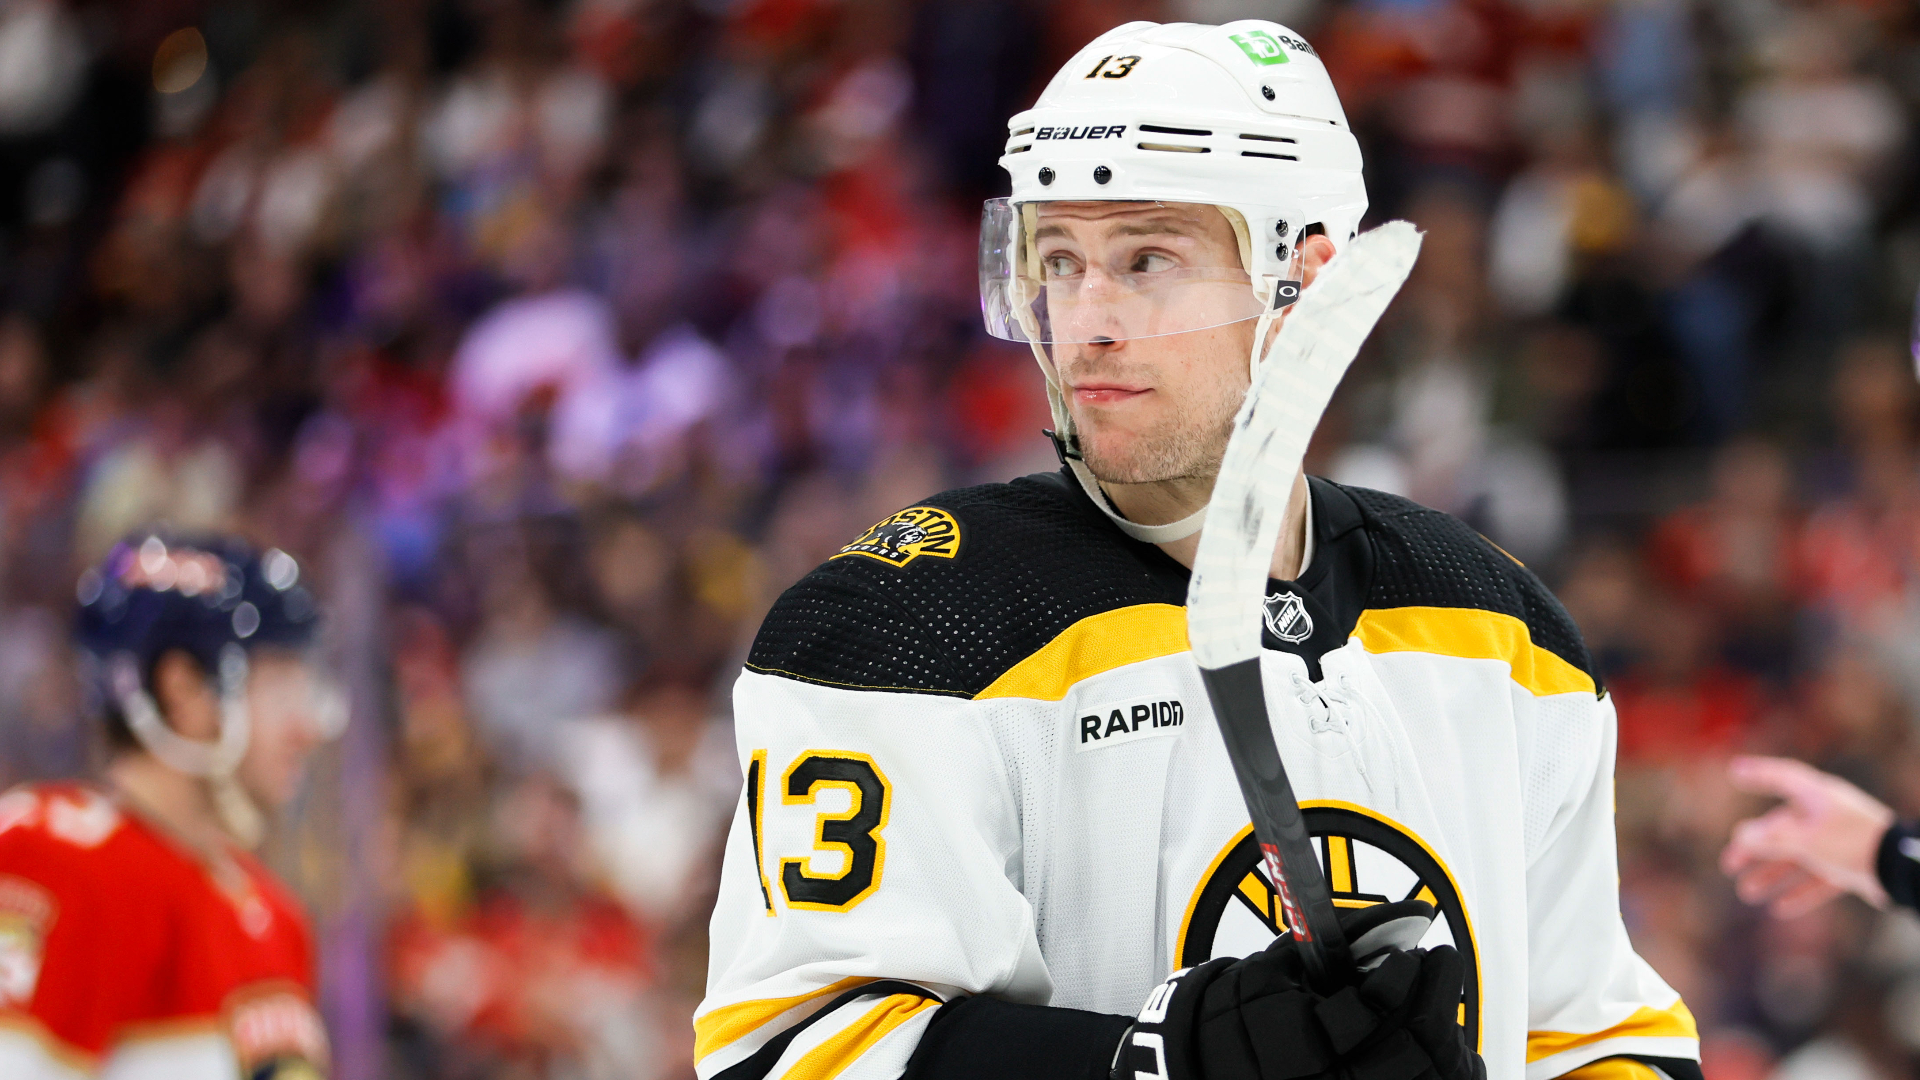 Bruins’ Playoff Exit Makes This Team New Stanley Cup Favorite